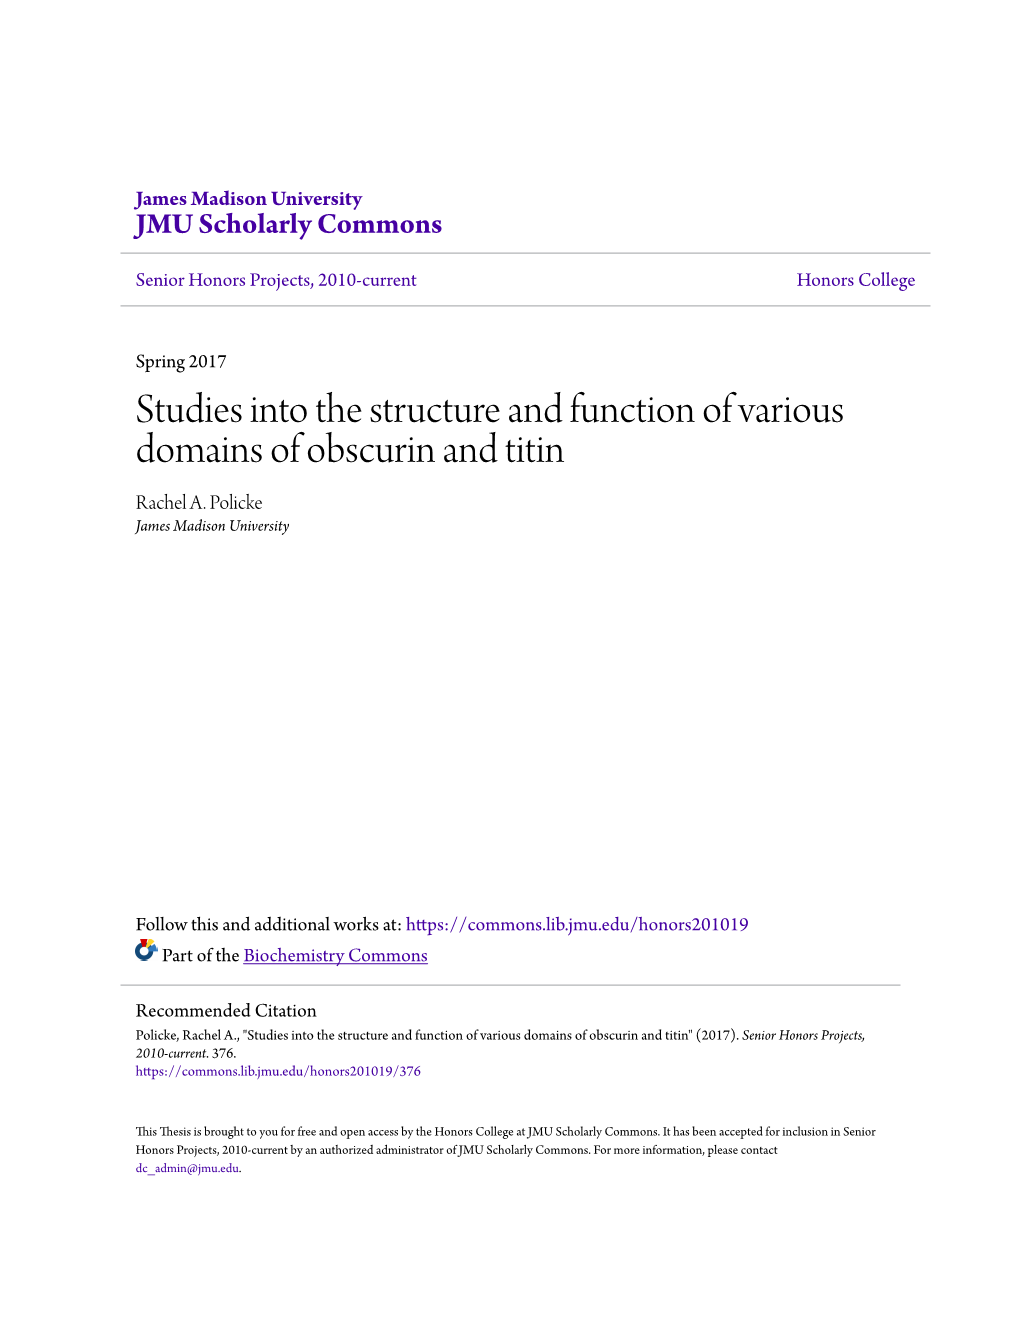 Studies Into the Structure and Function of Various Domains of Obscurin and Titin Rachel A